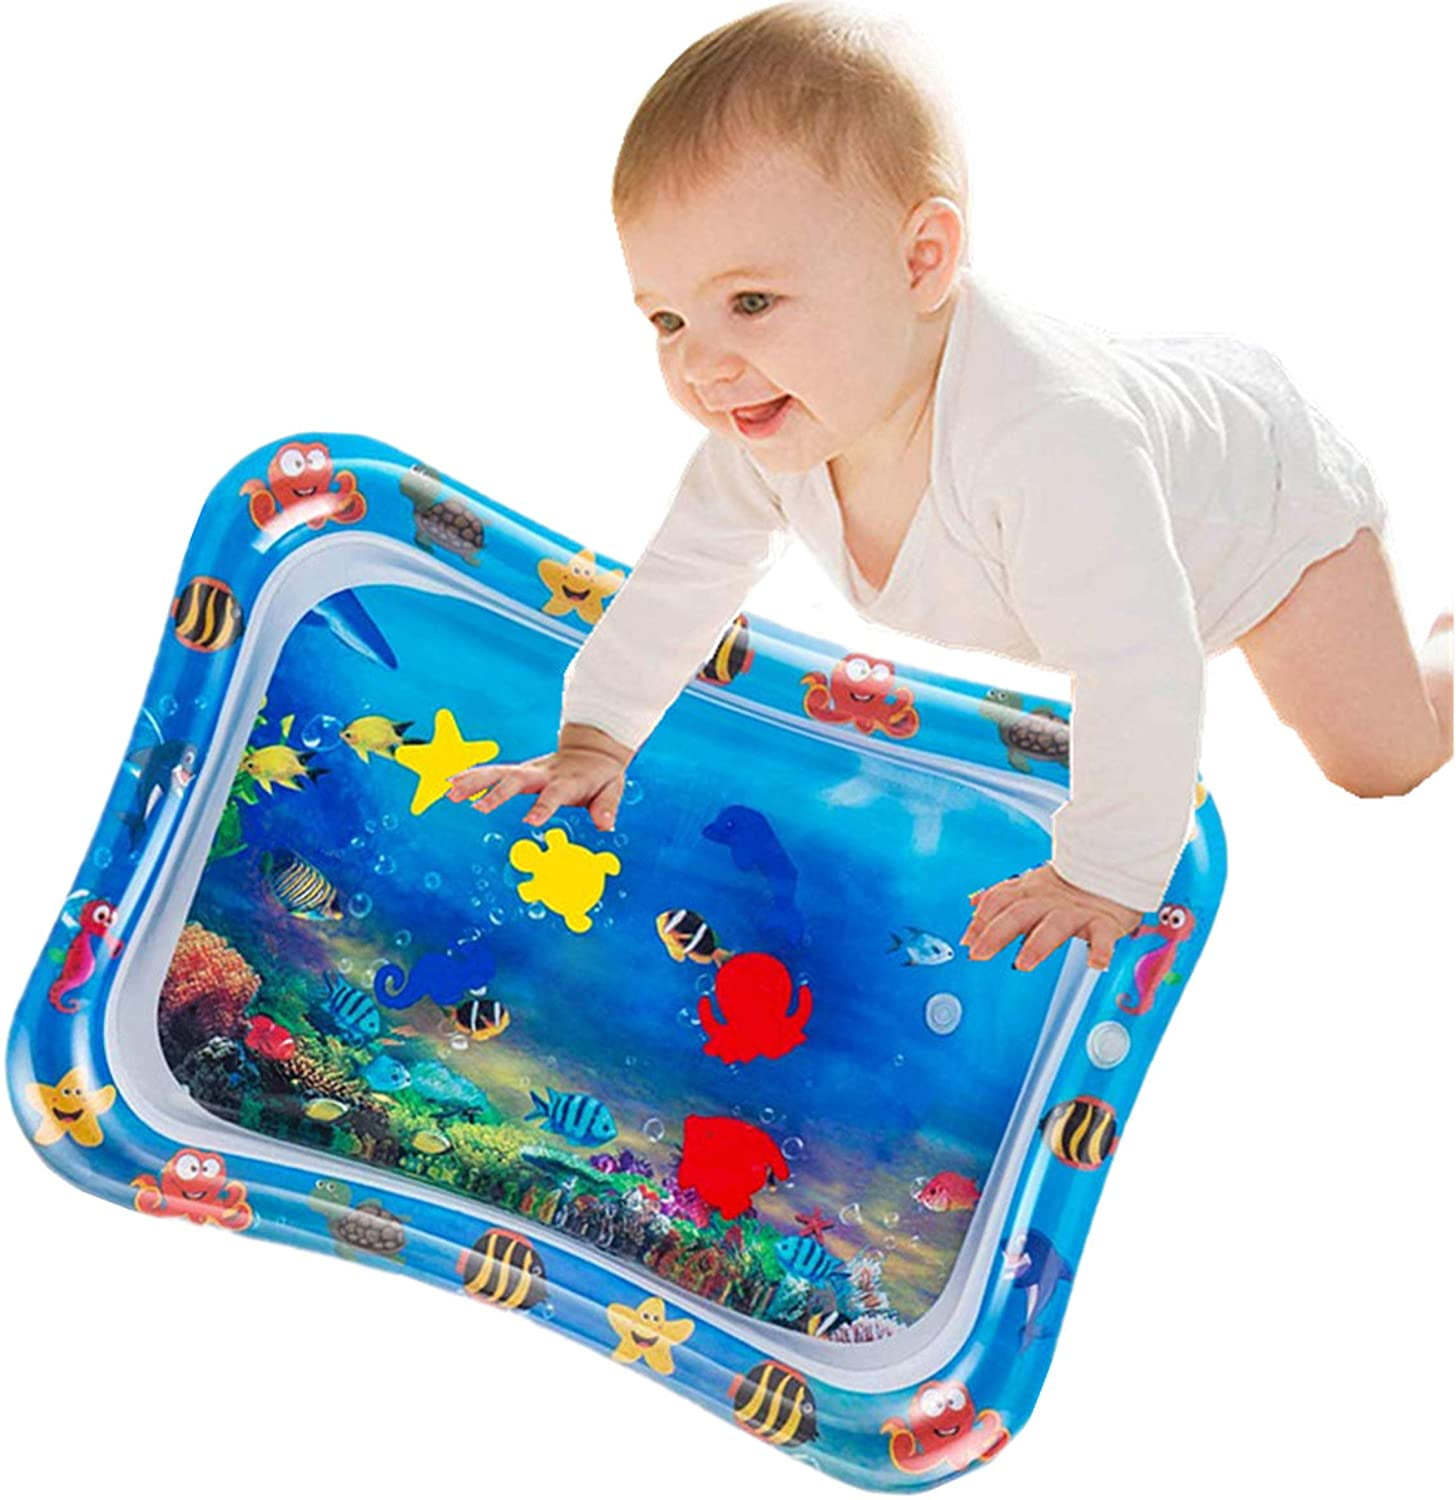 Inflatable Water Play Mat Toddler Baby Tummy Time Cute Animal Toy Fun Sea Game 